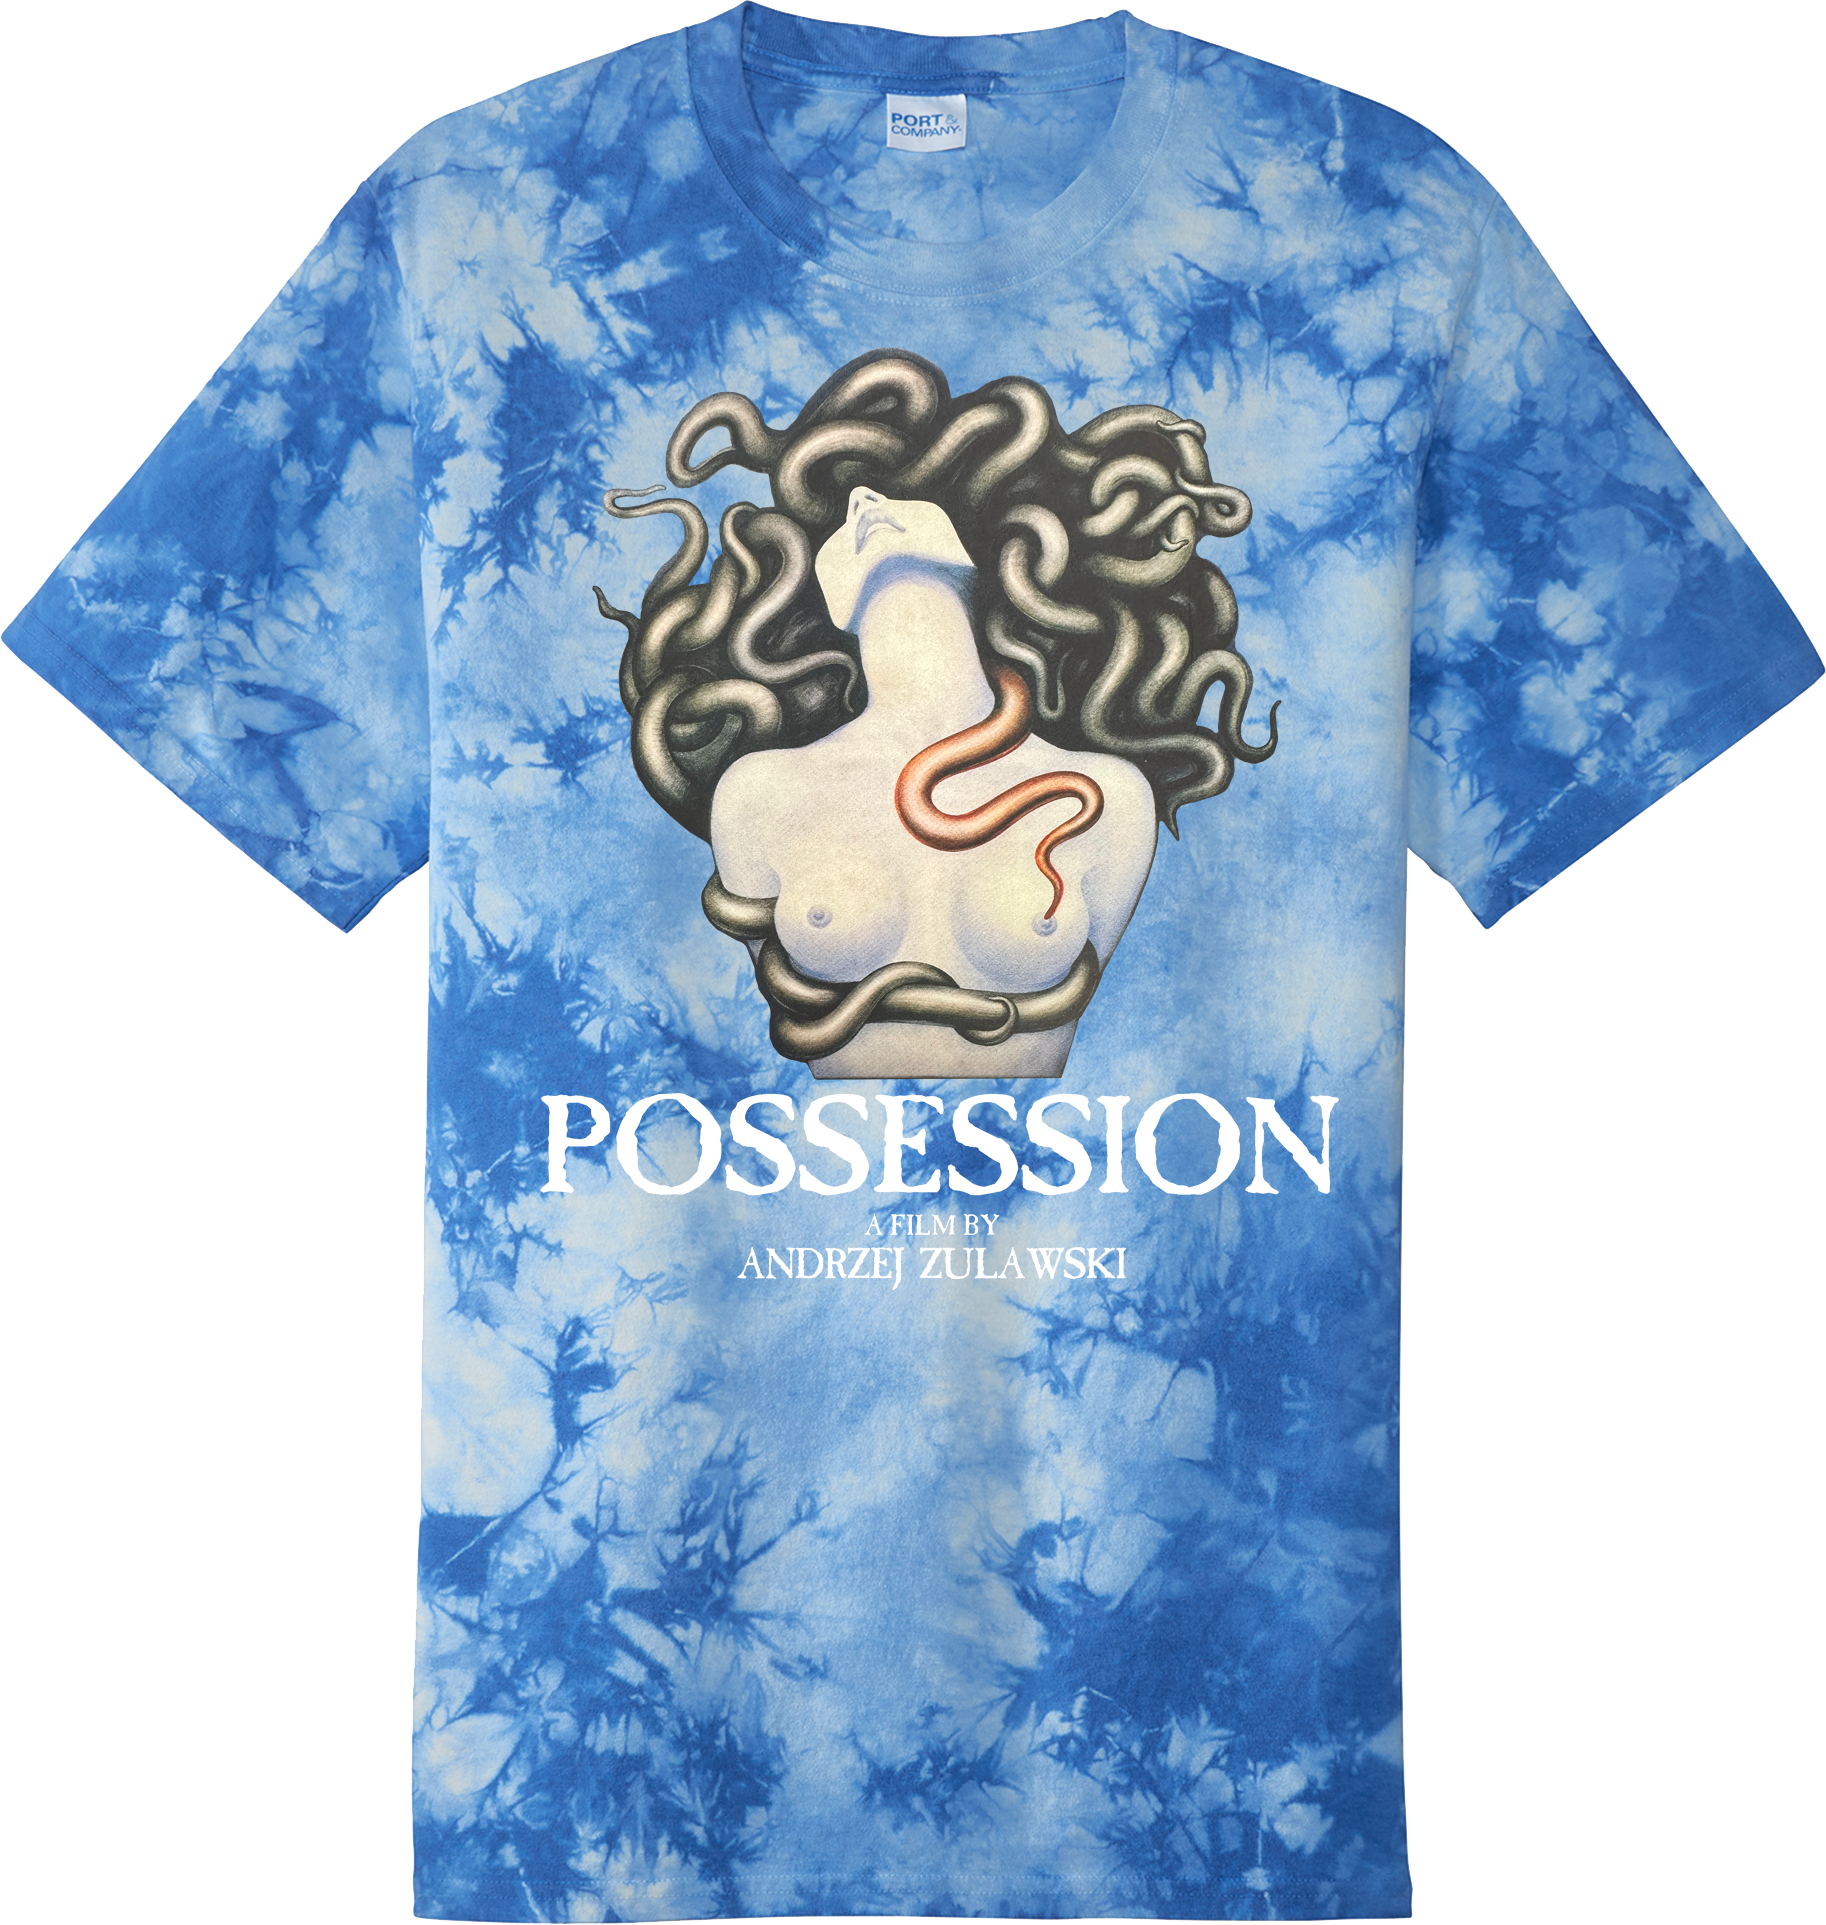 POSSESSION - FRENCH POSTER LIMITED EDITION TIE DIE T-SHIRT